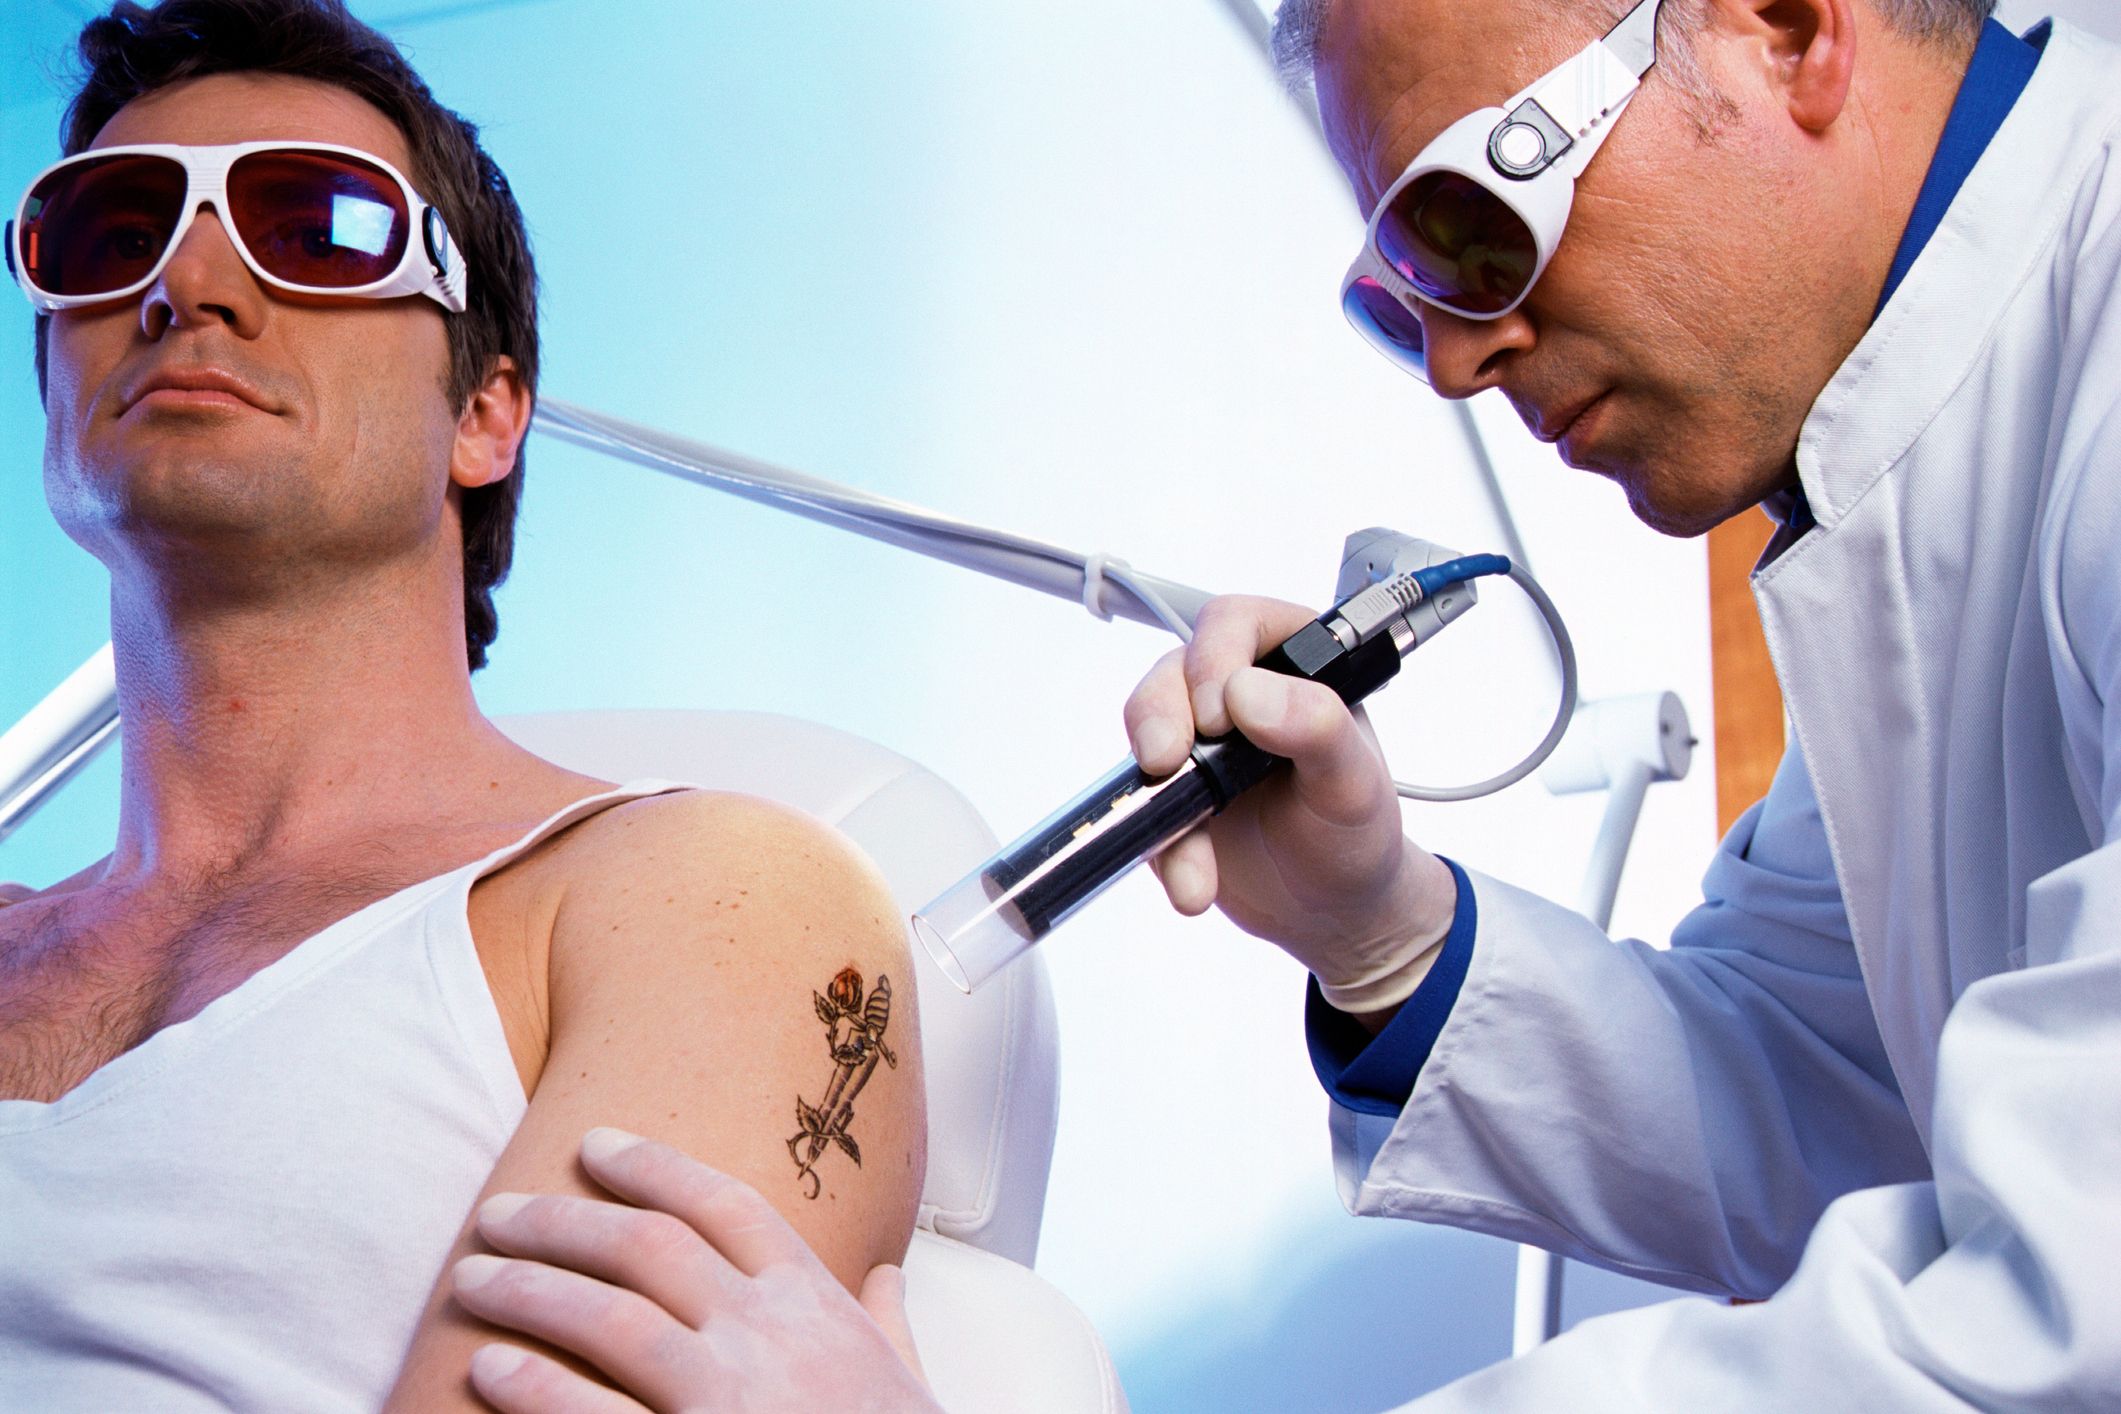 Tattoo Removals Facts, Cost, Risks, and More